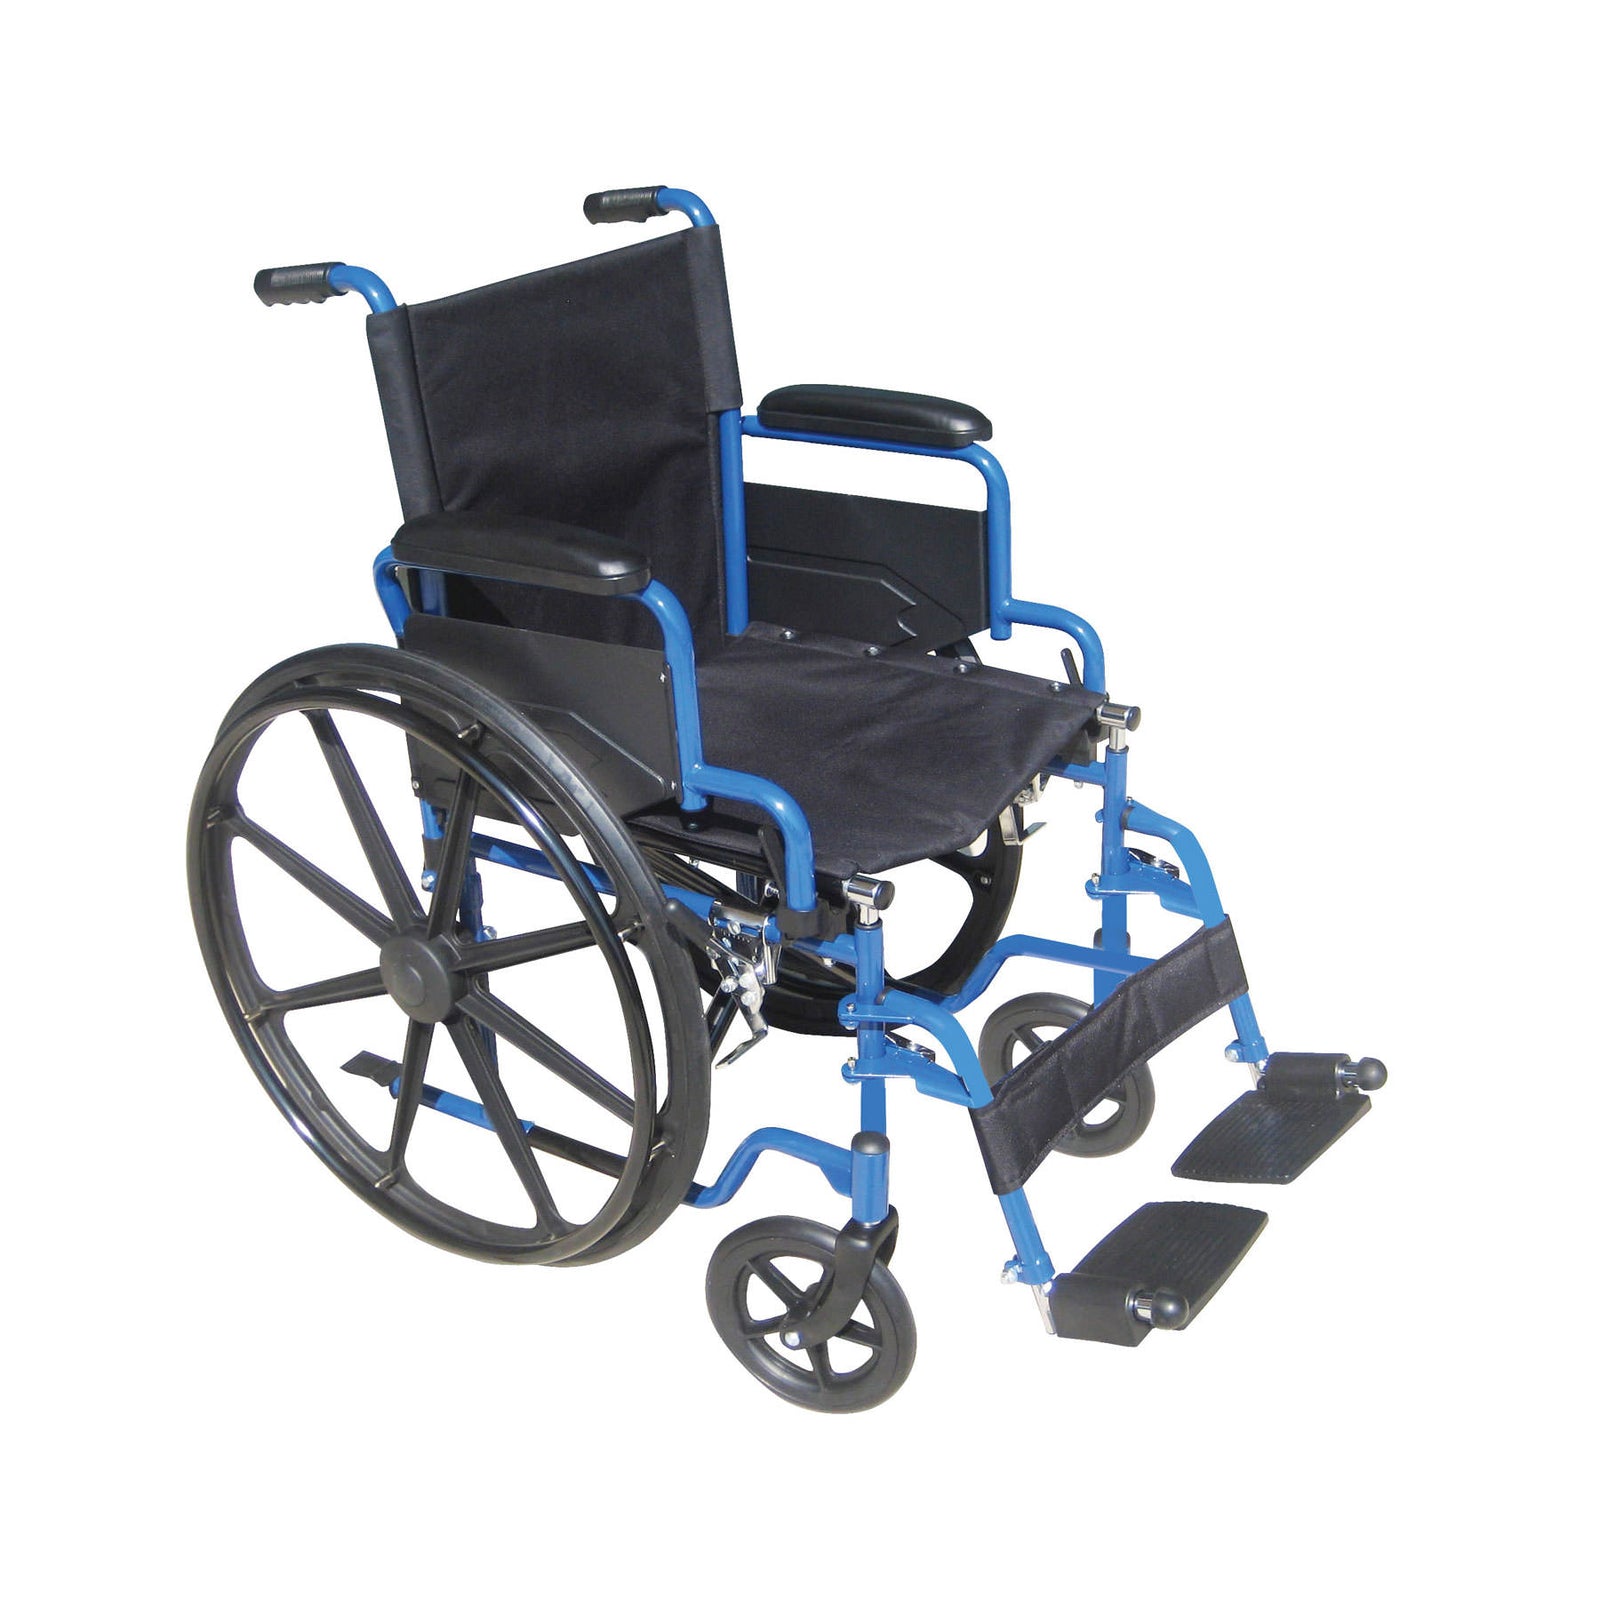 The Curve Wheelchair Cushion - Just Walkers